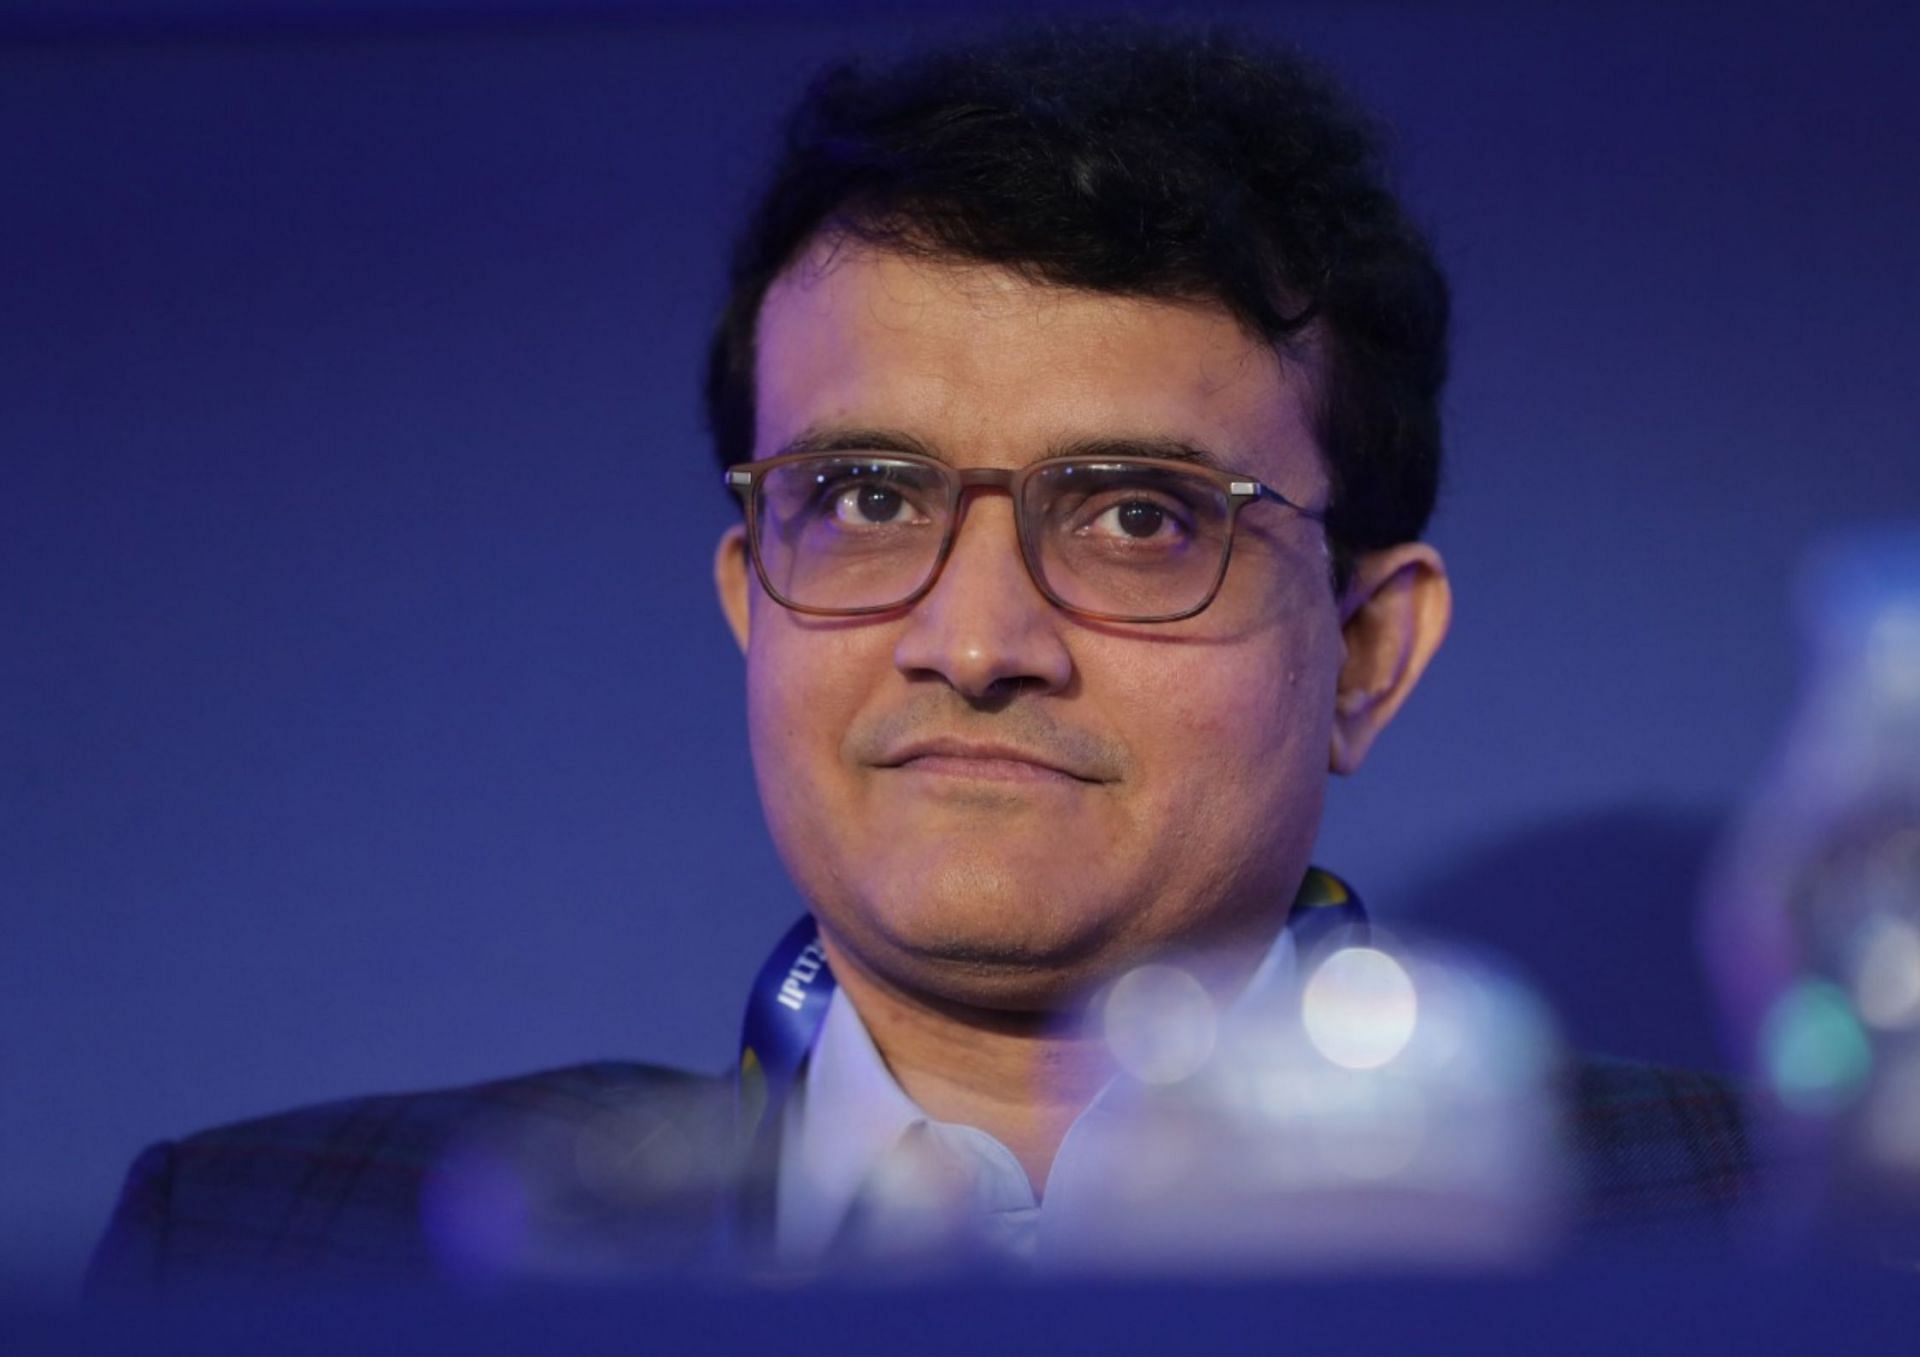 Currently the President of the BCCI, Sourav Ganguly&#039;s highest IPL score during his playing days was 91 (Picture Credits: IPL).